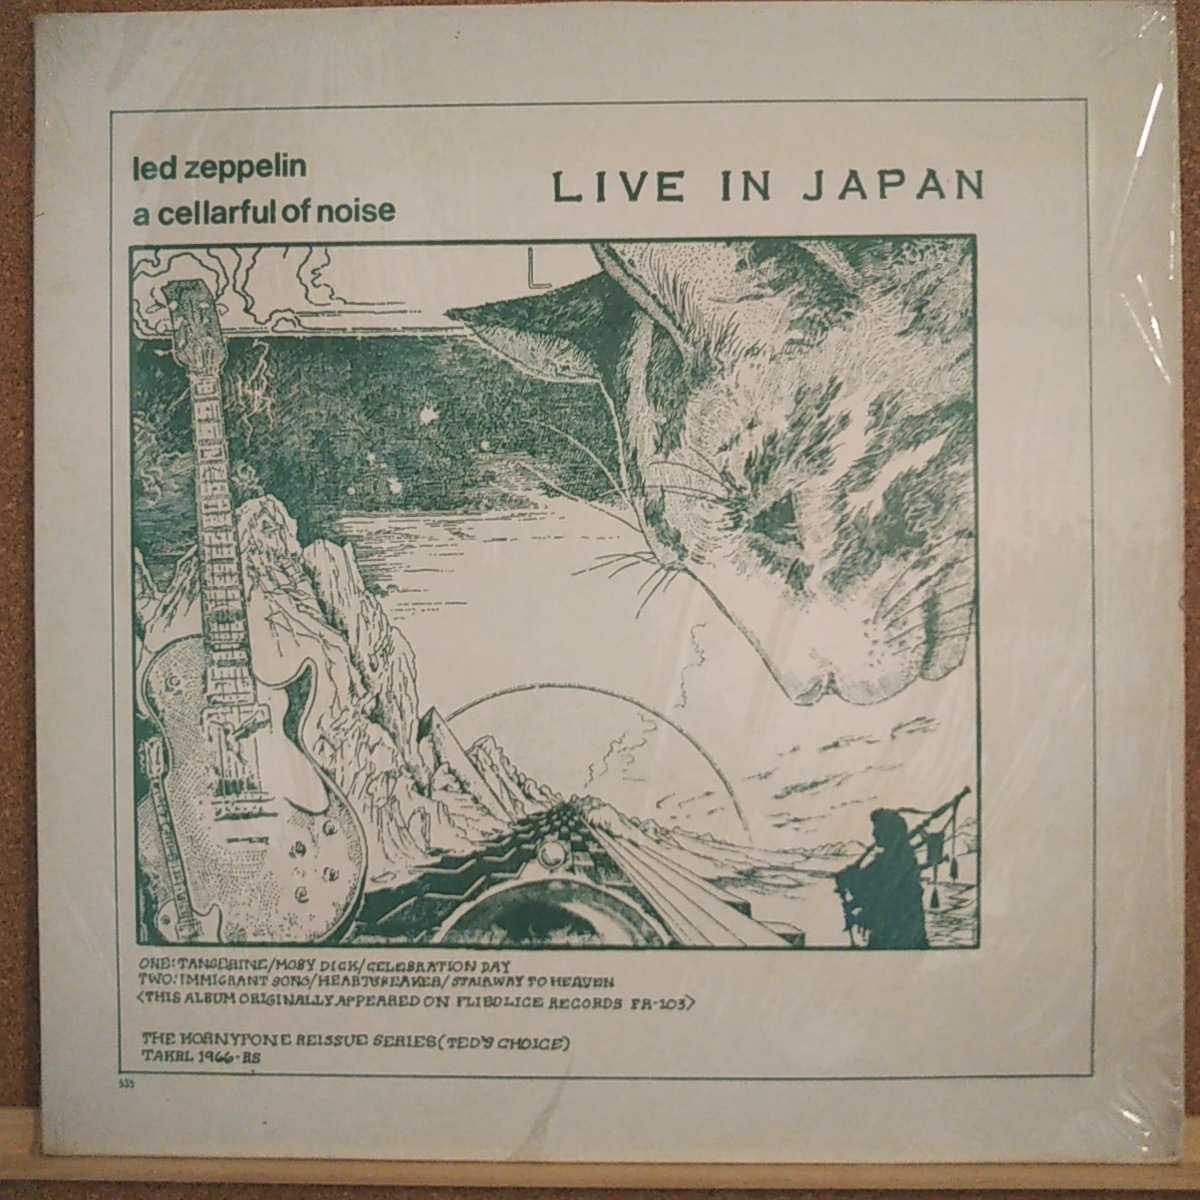 LP(シュリンク)レッドツェペリン//led zeppelin a cellarful of noise LIVE IN JAPAN【同梱可能４枚まで】